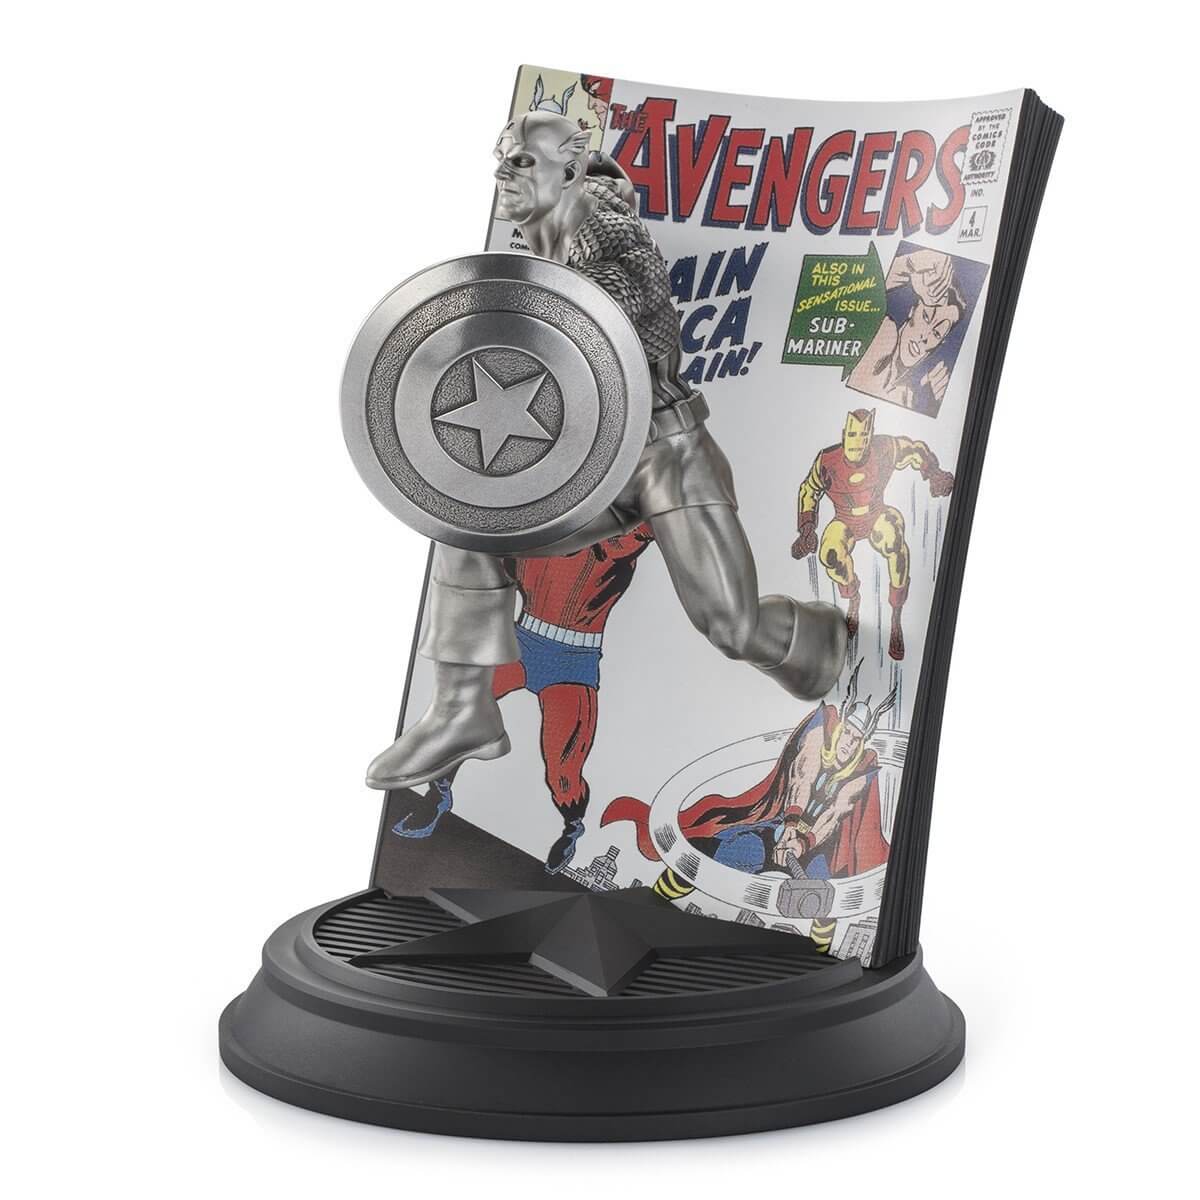 Captain America The Avengers #4 Limited Edition Figurine - Marvel Statue